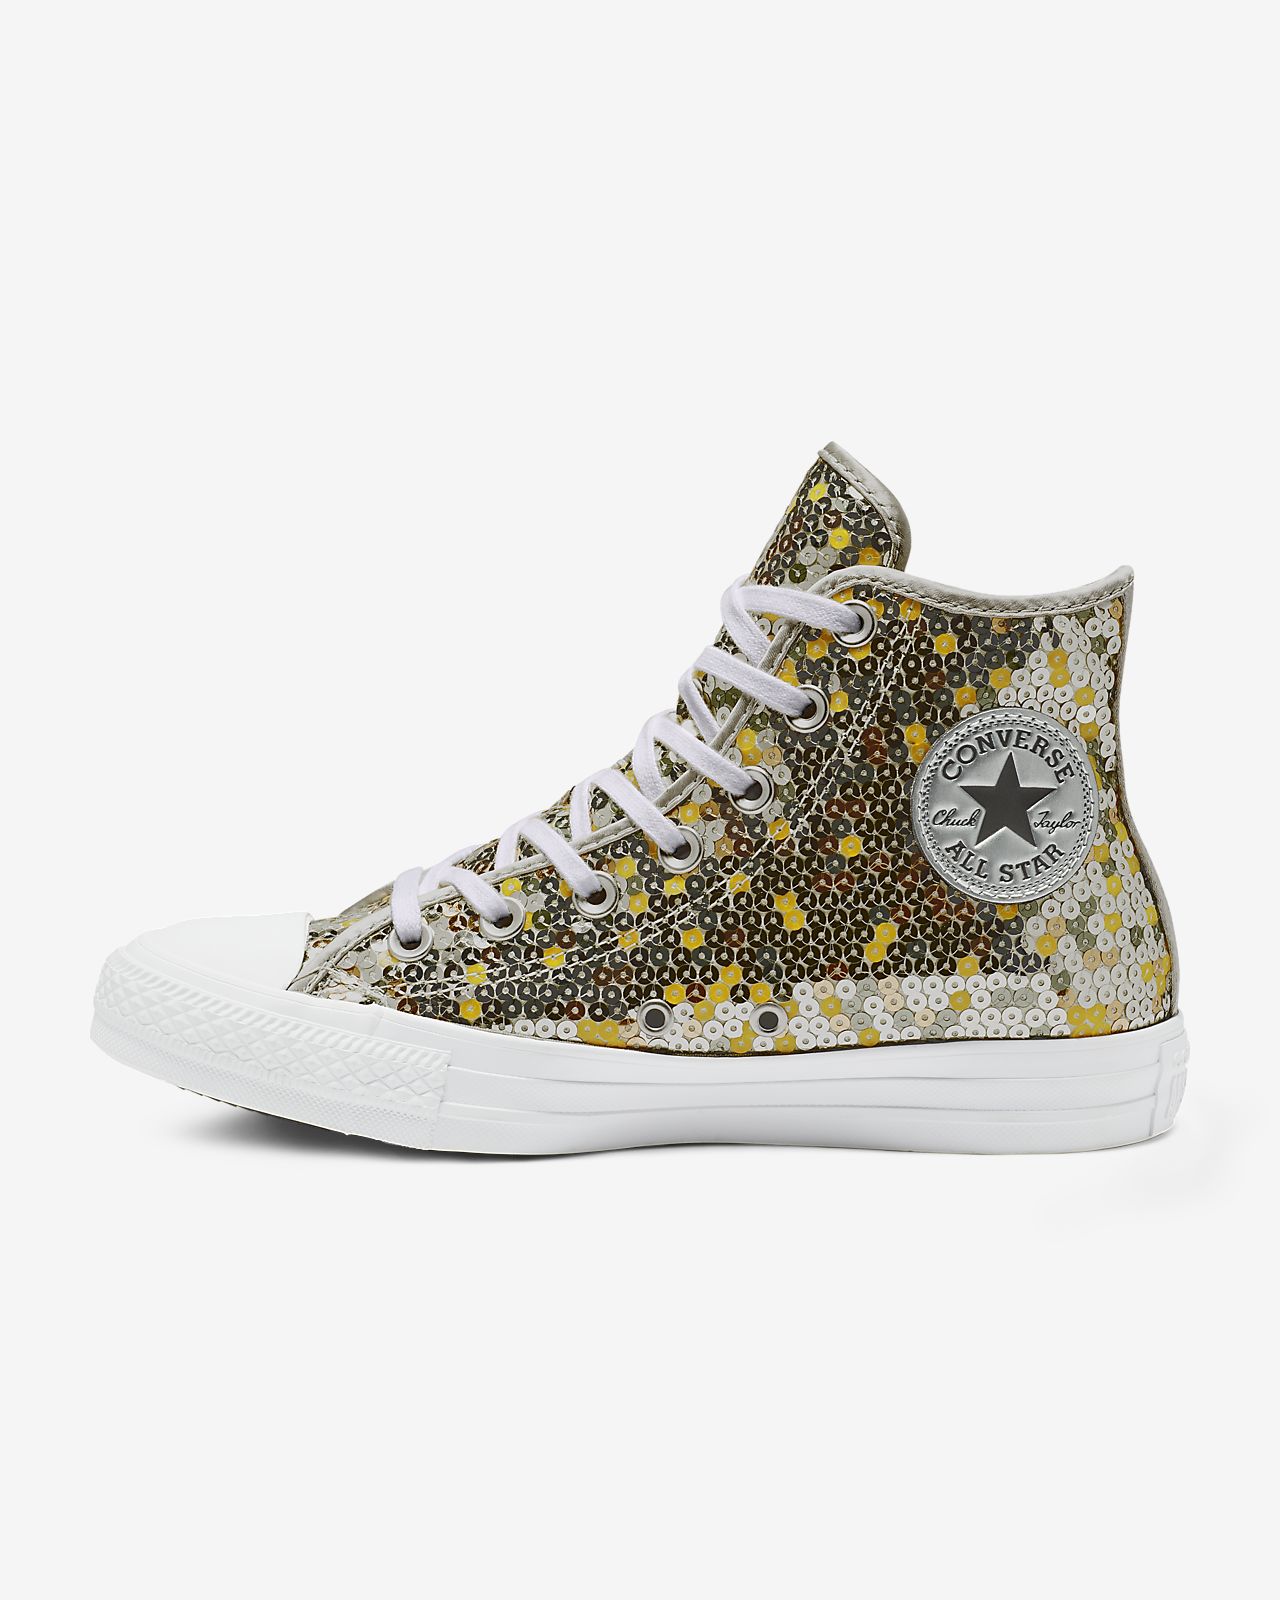 Converse Chuck Taylor All Star Holiday Scene Sequin High Top Womens